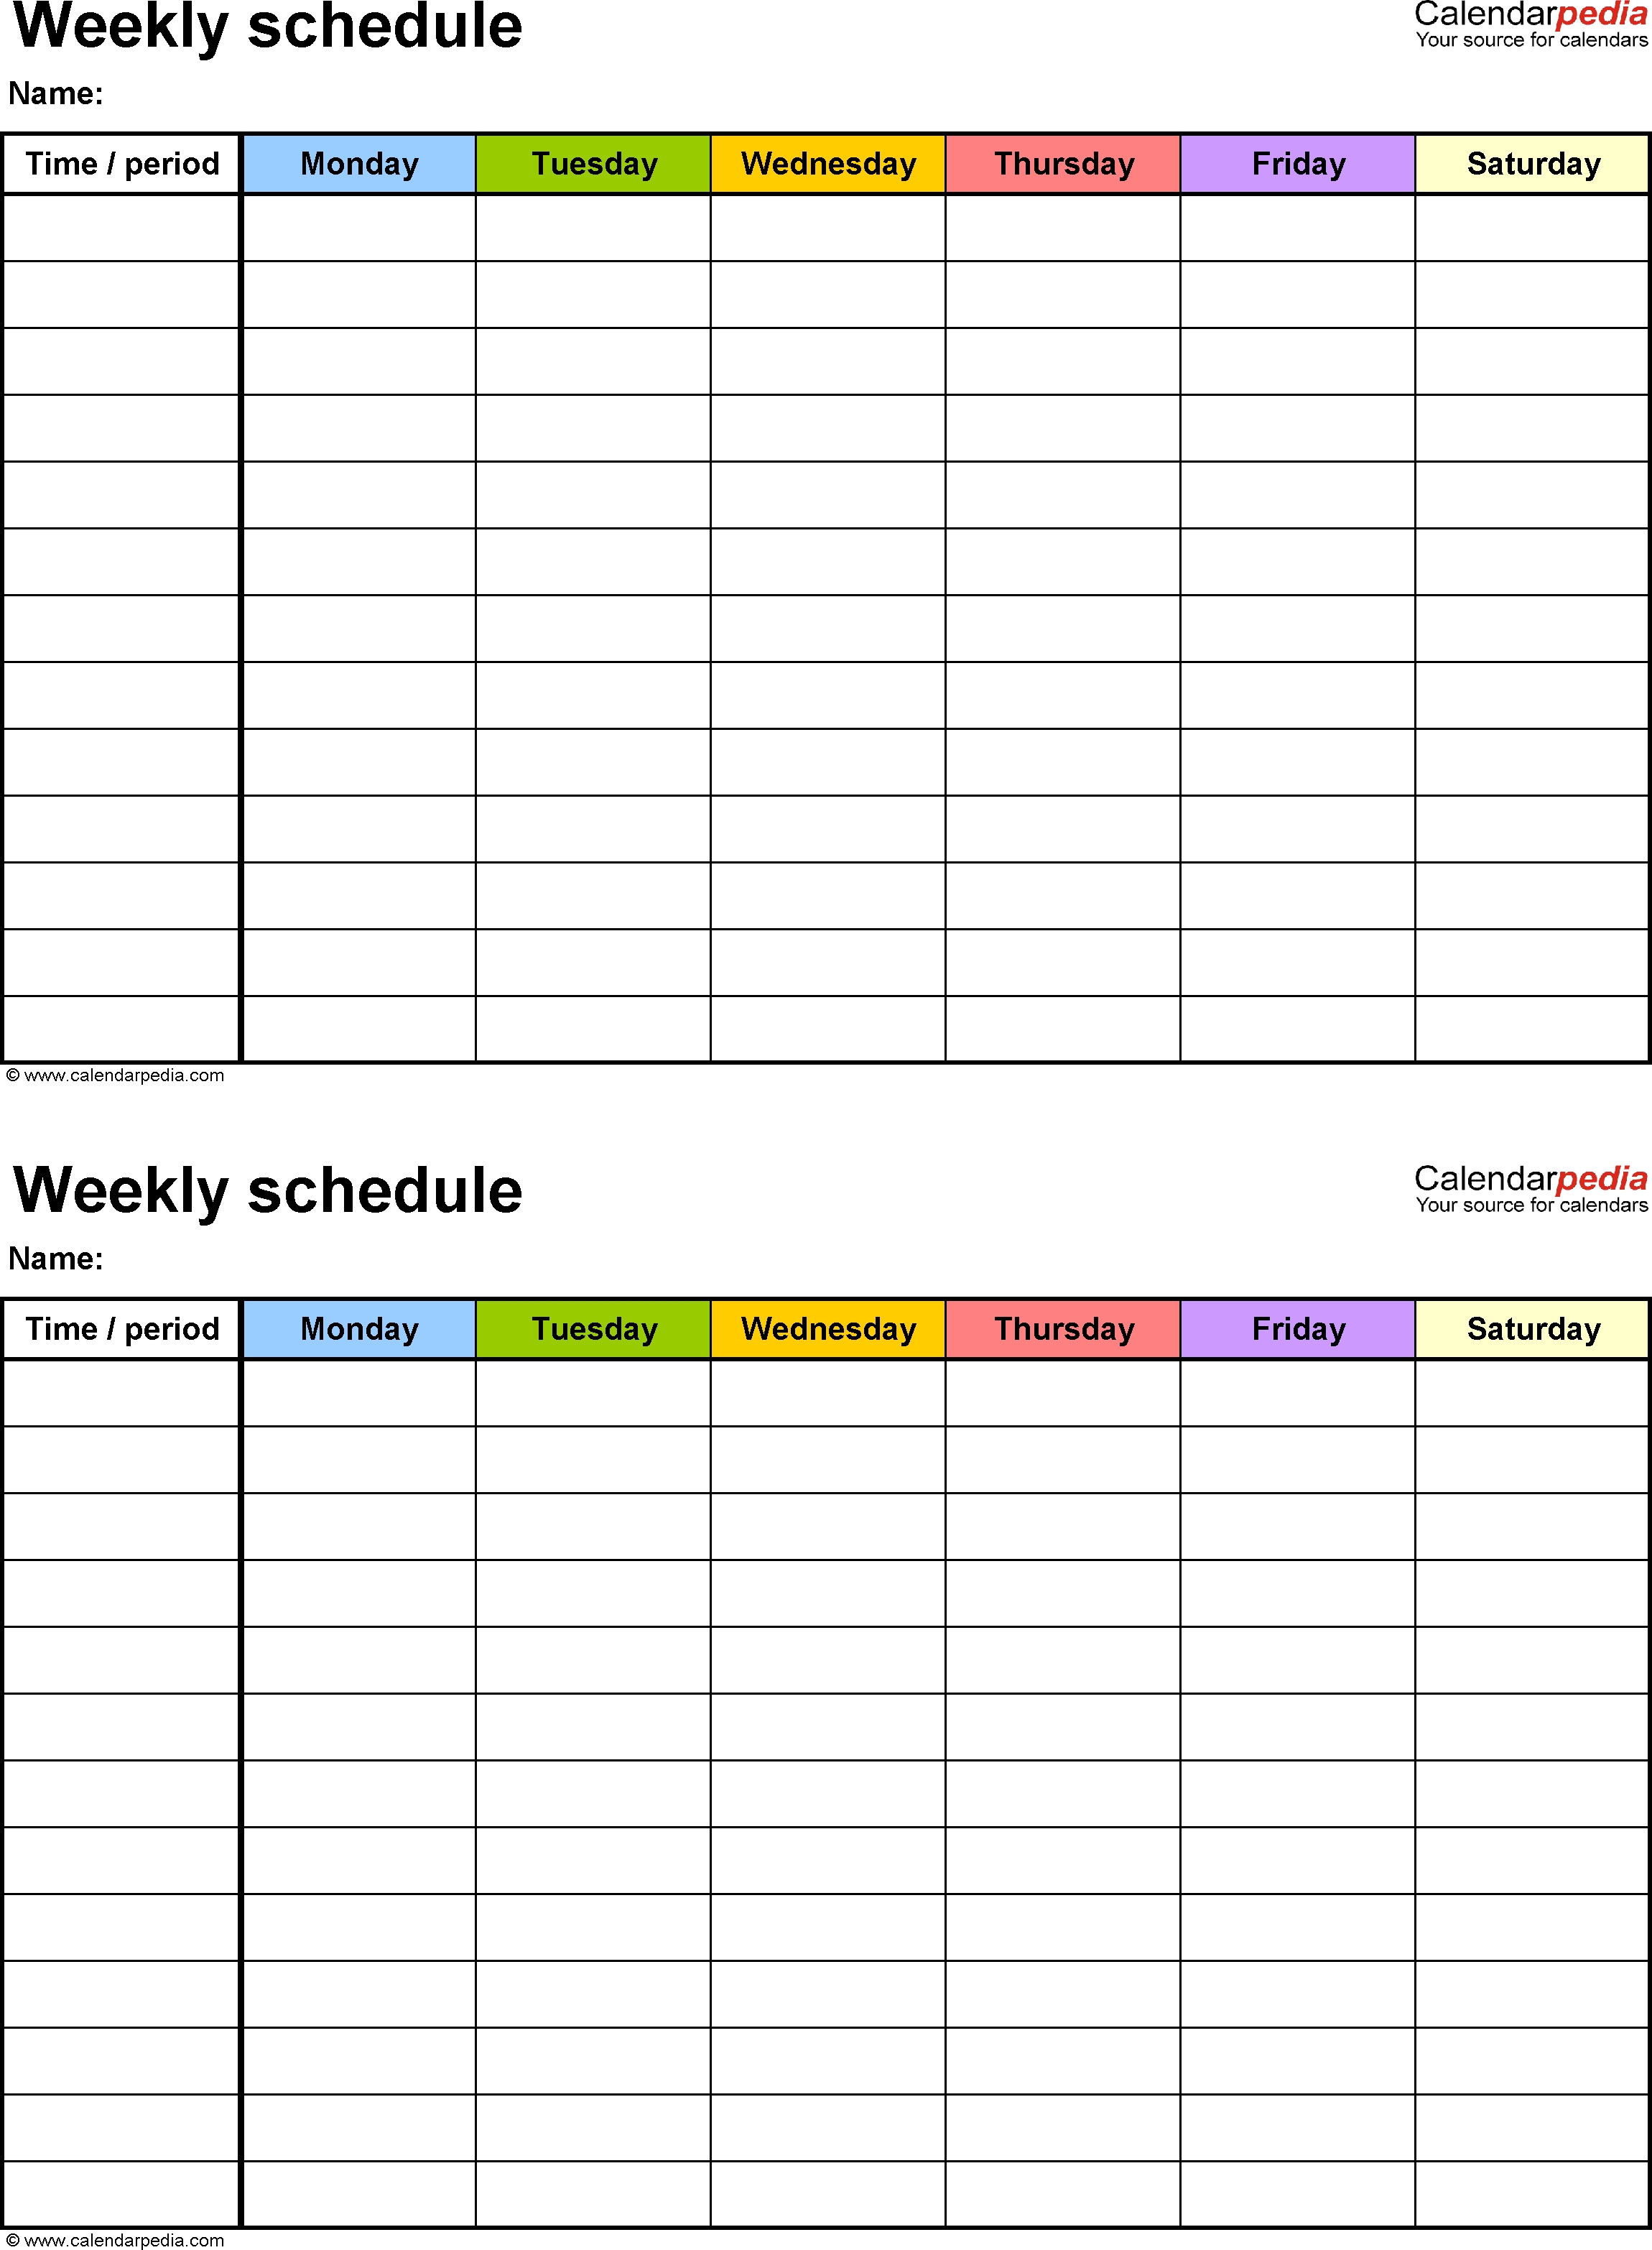 Free Weekly Schedule Templates For Word - 18 Templates inside Day 7 Weekly Planner Template